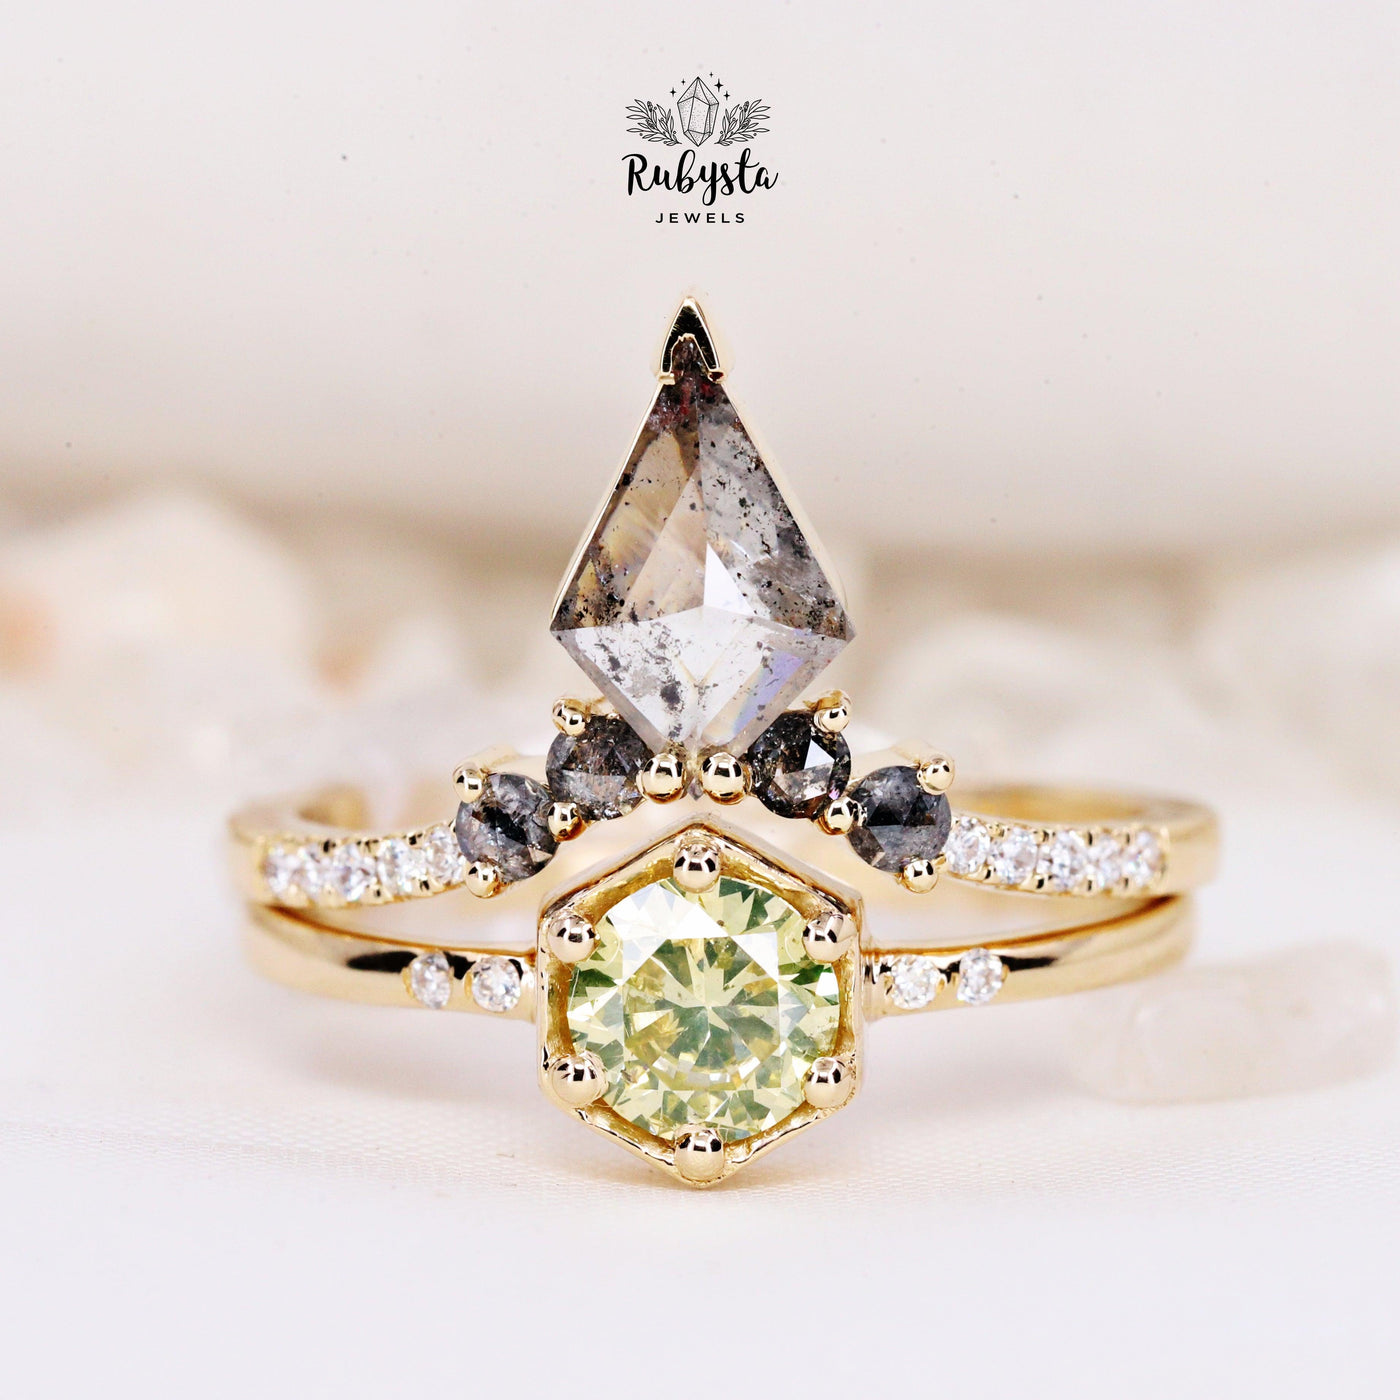 Greenish Round Brilliant Engagement Ring With Salt And Pepper Kite Wedding Band